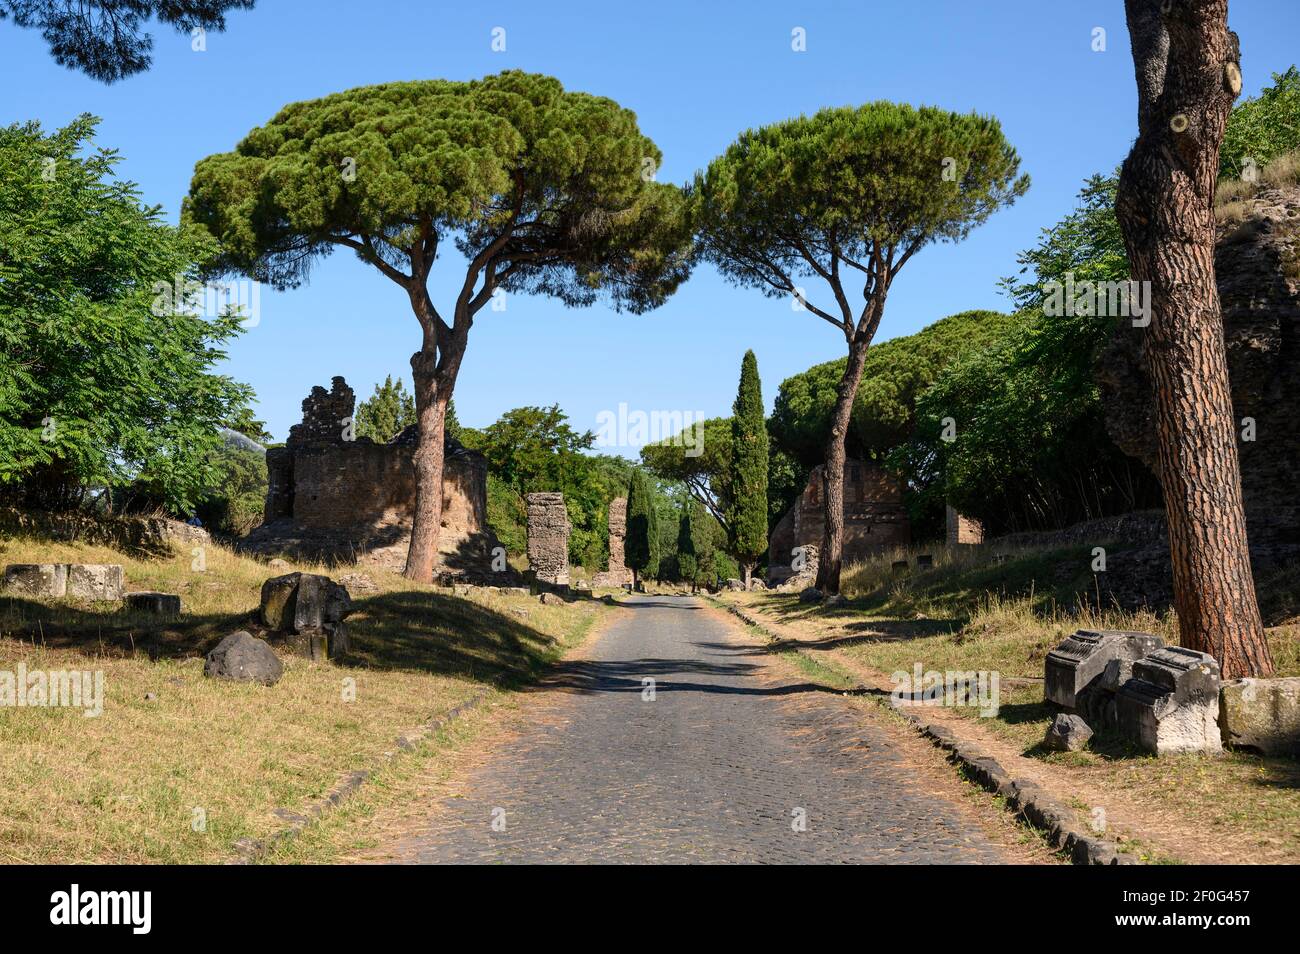 Rome. Italy. Via Appia Antica (Appian Way), Mediterranean Stone Pine trees and funerary monuments lining the ancient Roman road. Stock Photo